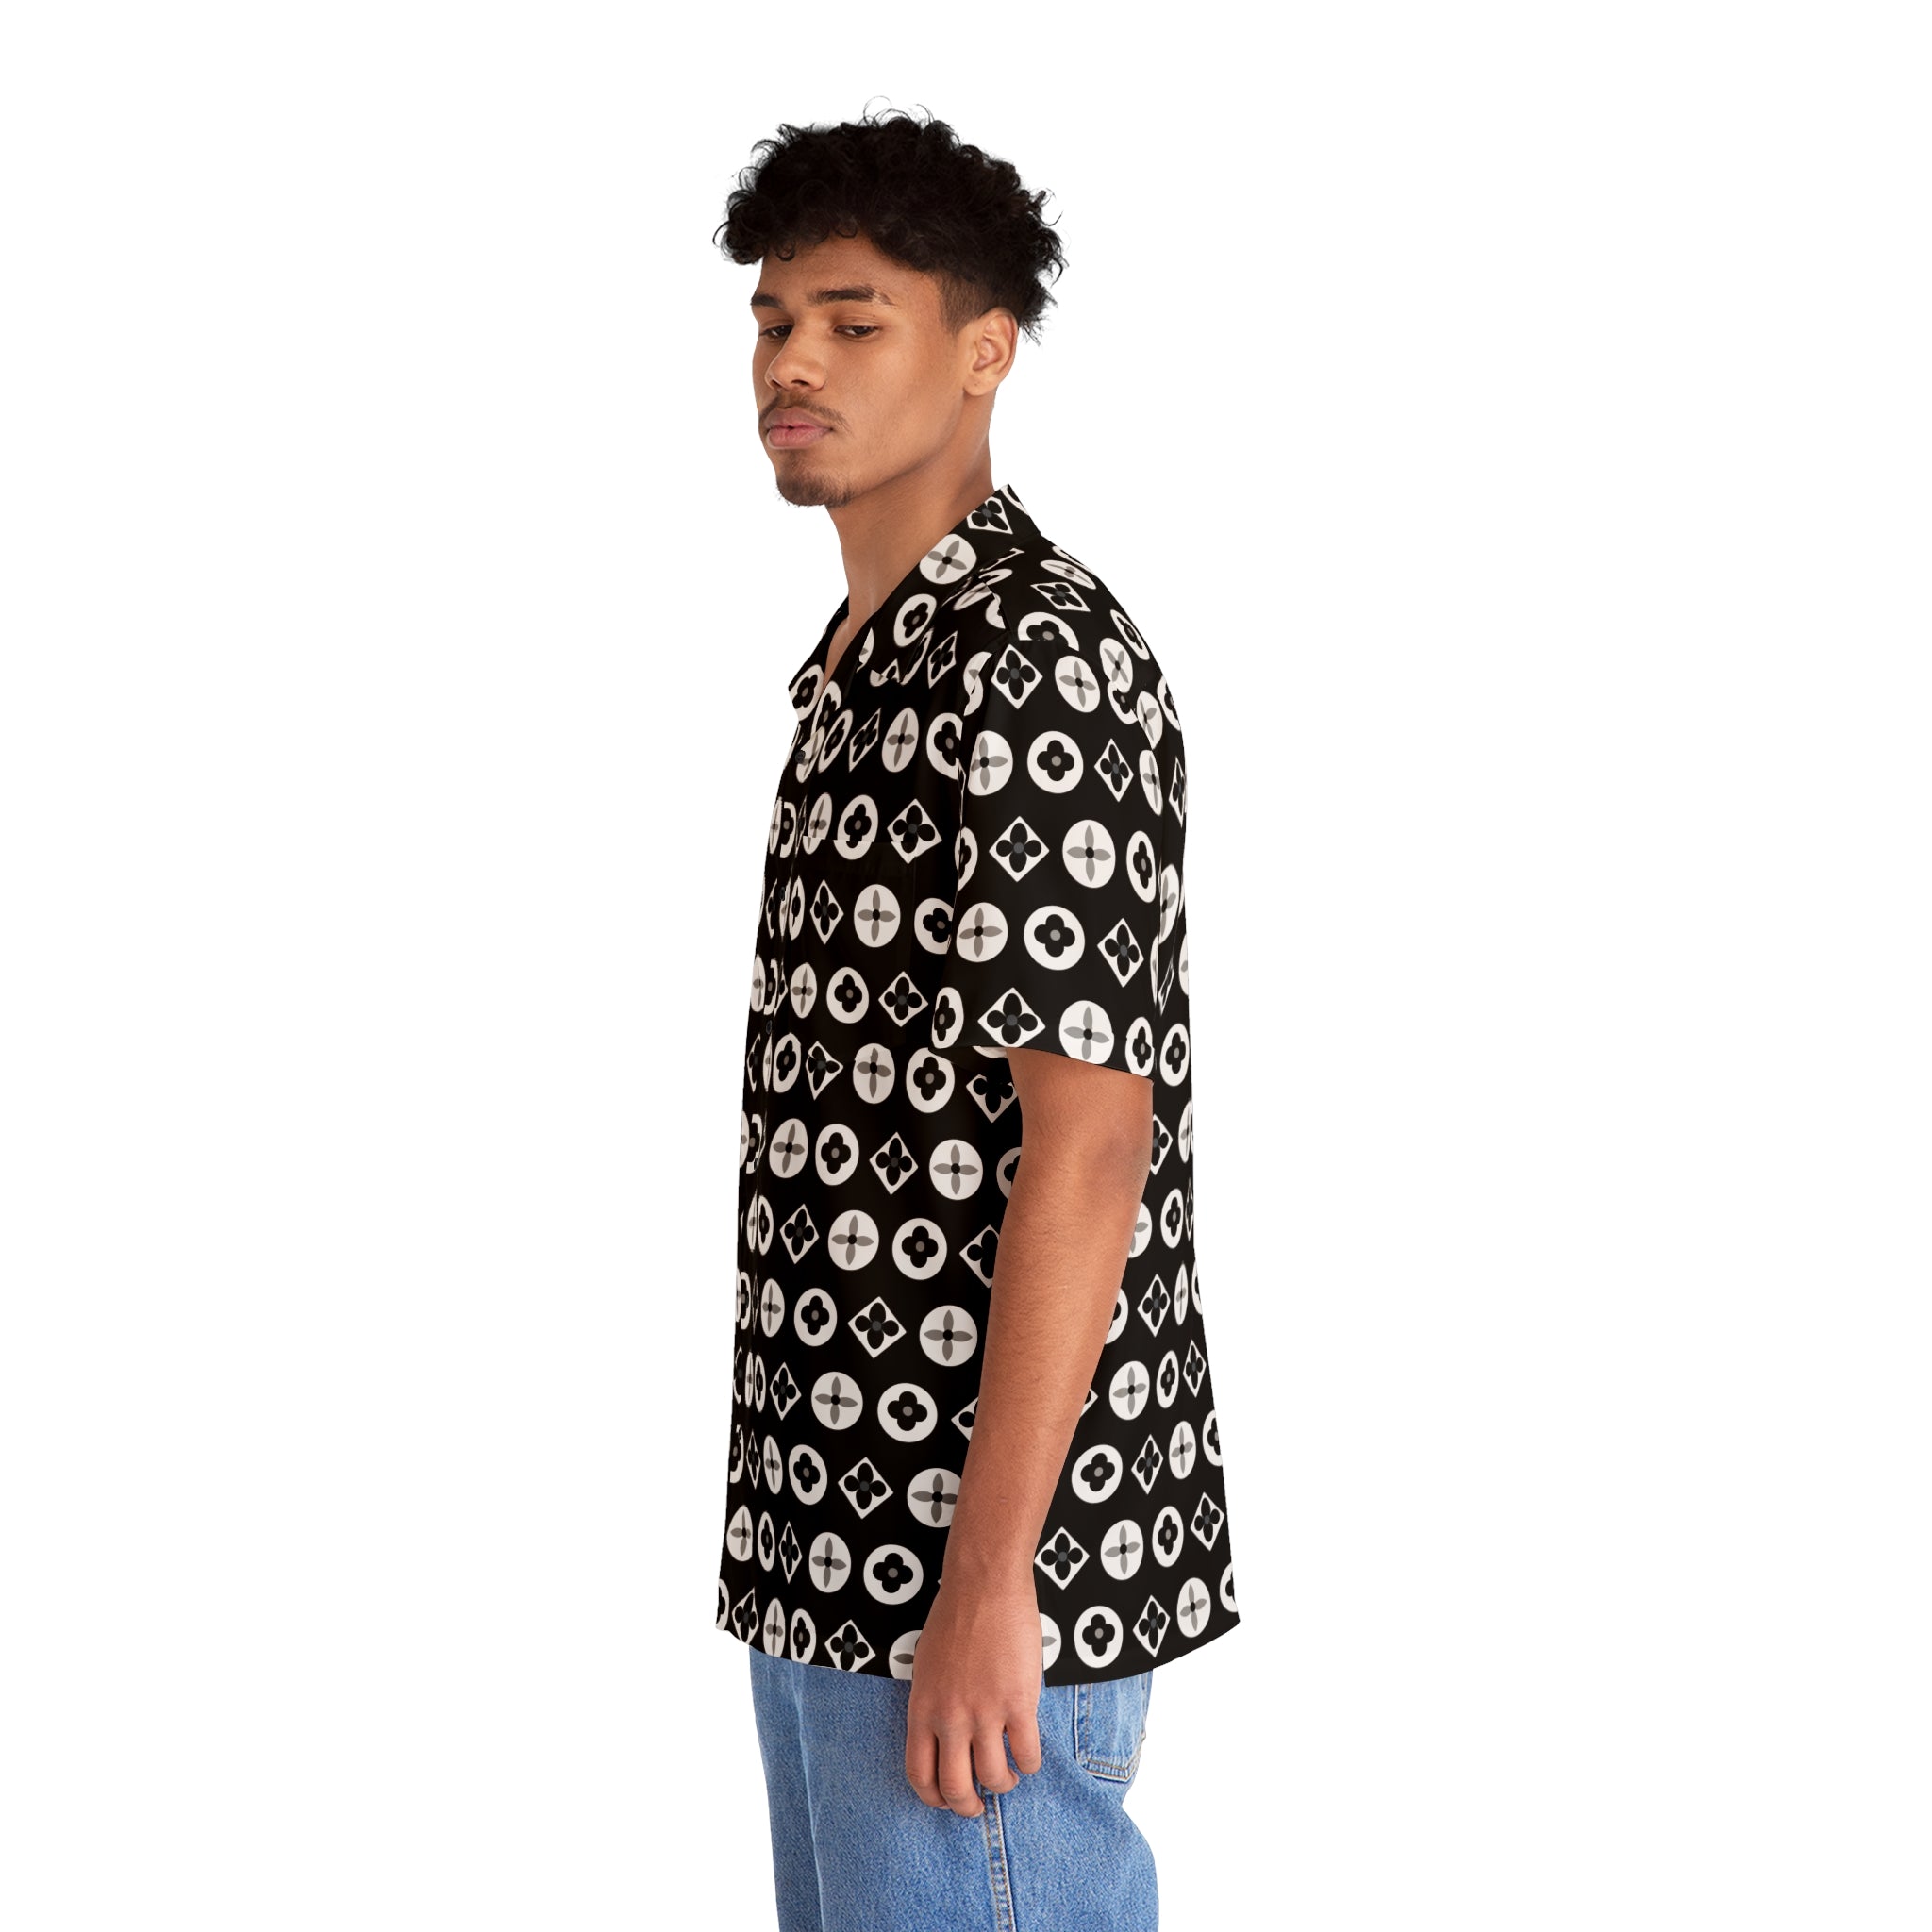 Groove Collection Trilogy of Icons Pattern (Black, White) Unisex Gender Neutral Black Button Up Shirt, Hawaiian Shirt